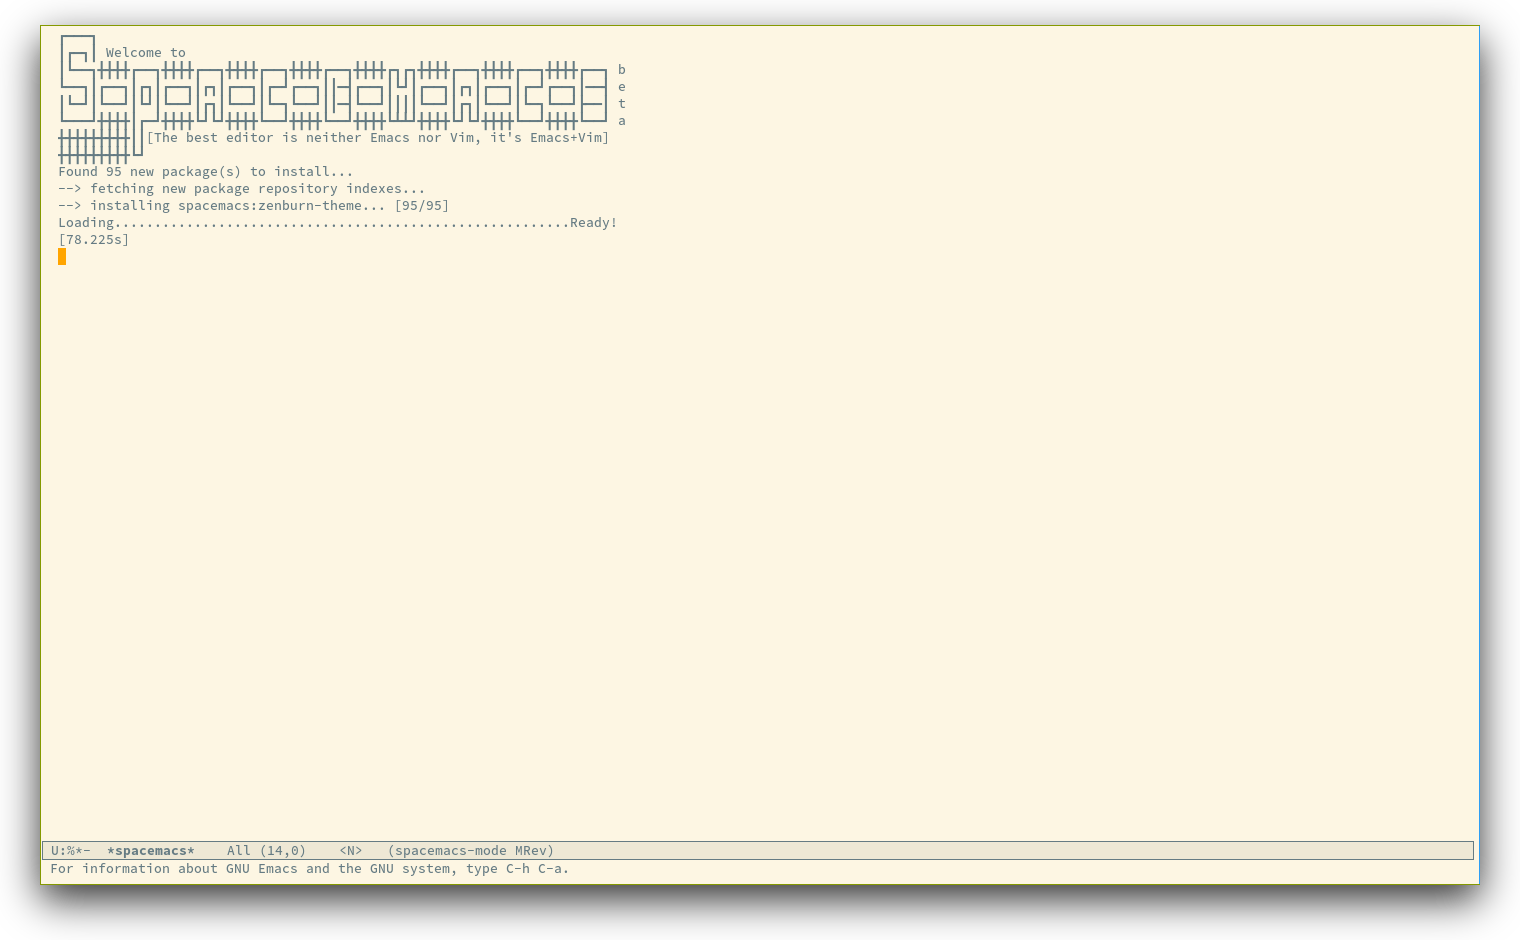 /TakeV/spacemacs/media/commit/a788e1a88e34808be83e770a8157d7131c7af0b1/doc/img/spacemacs-startup.png